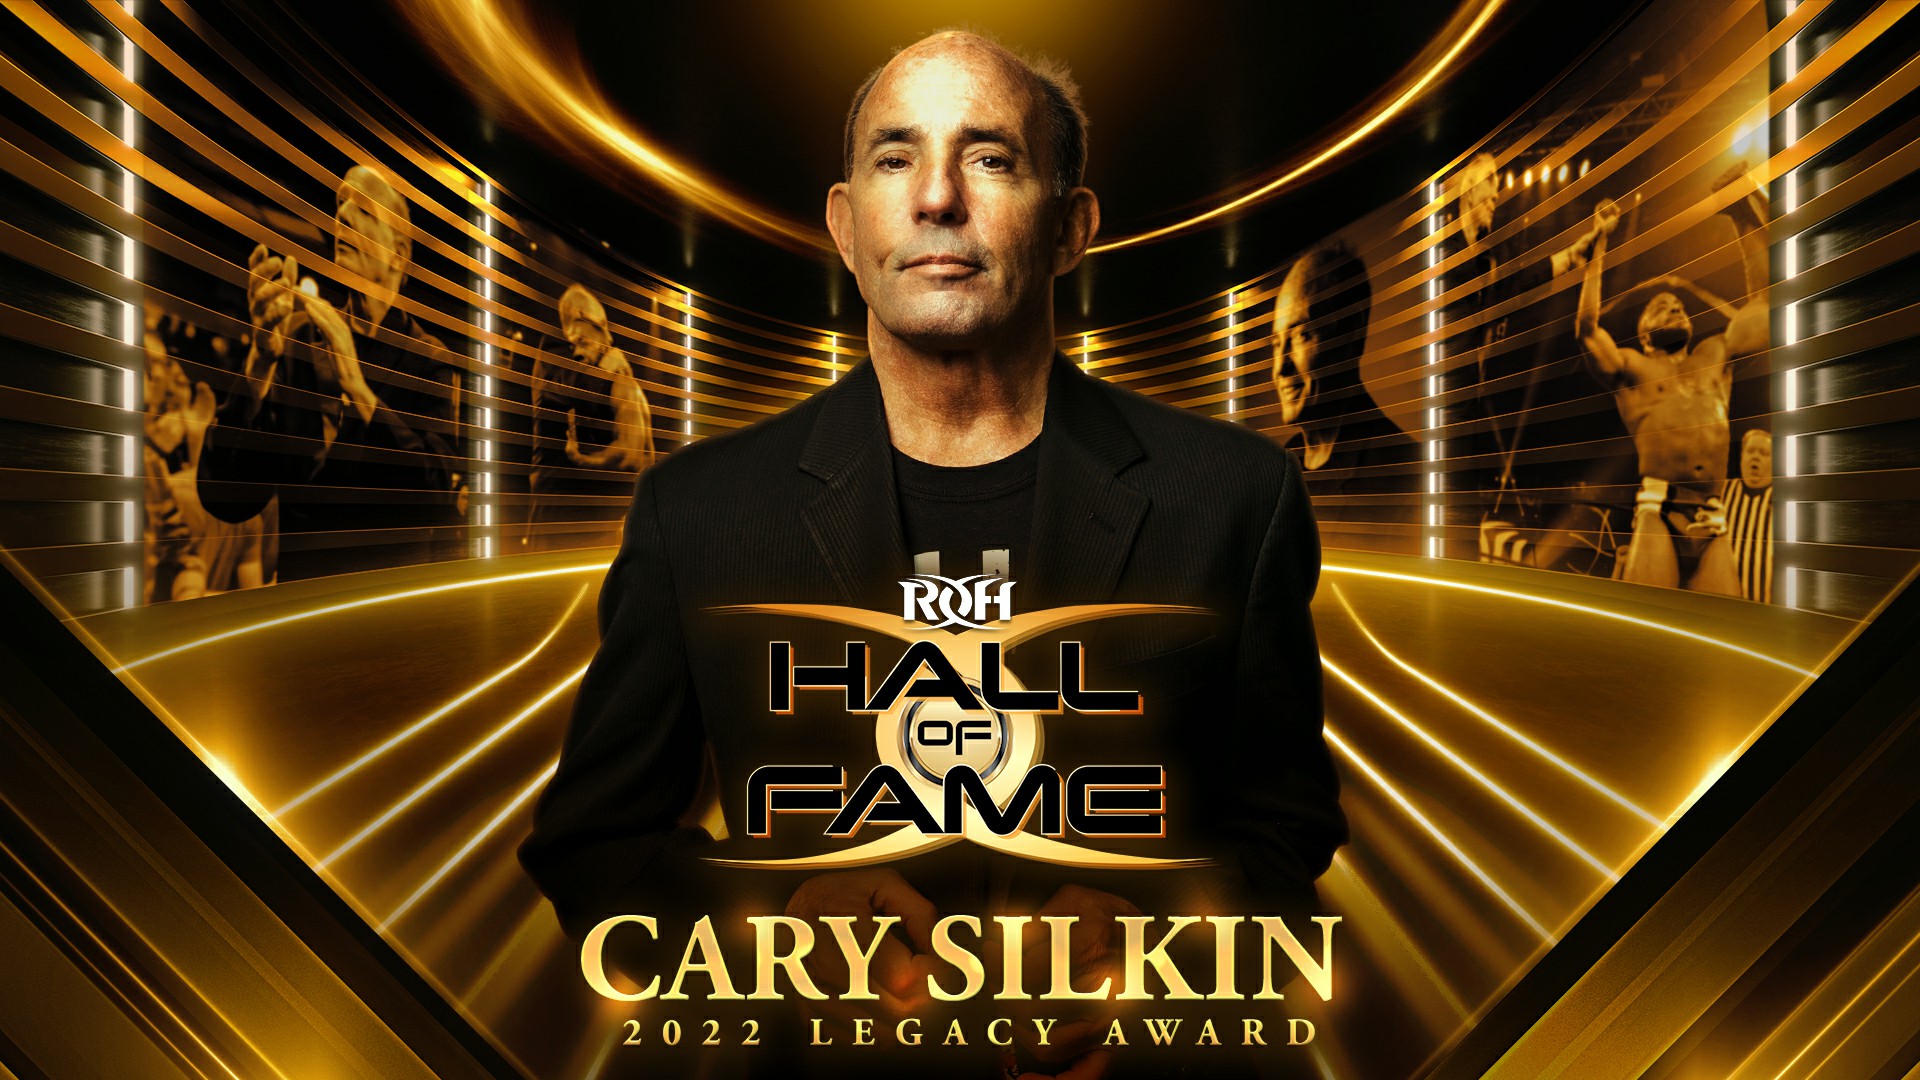 Cary Silkin Talks About ROH’s Treatment By Tony Khan